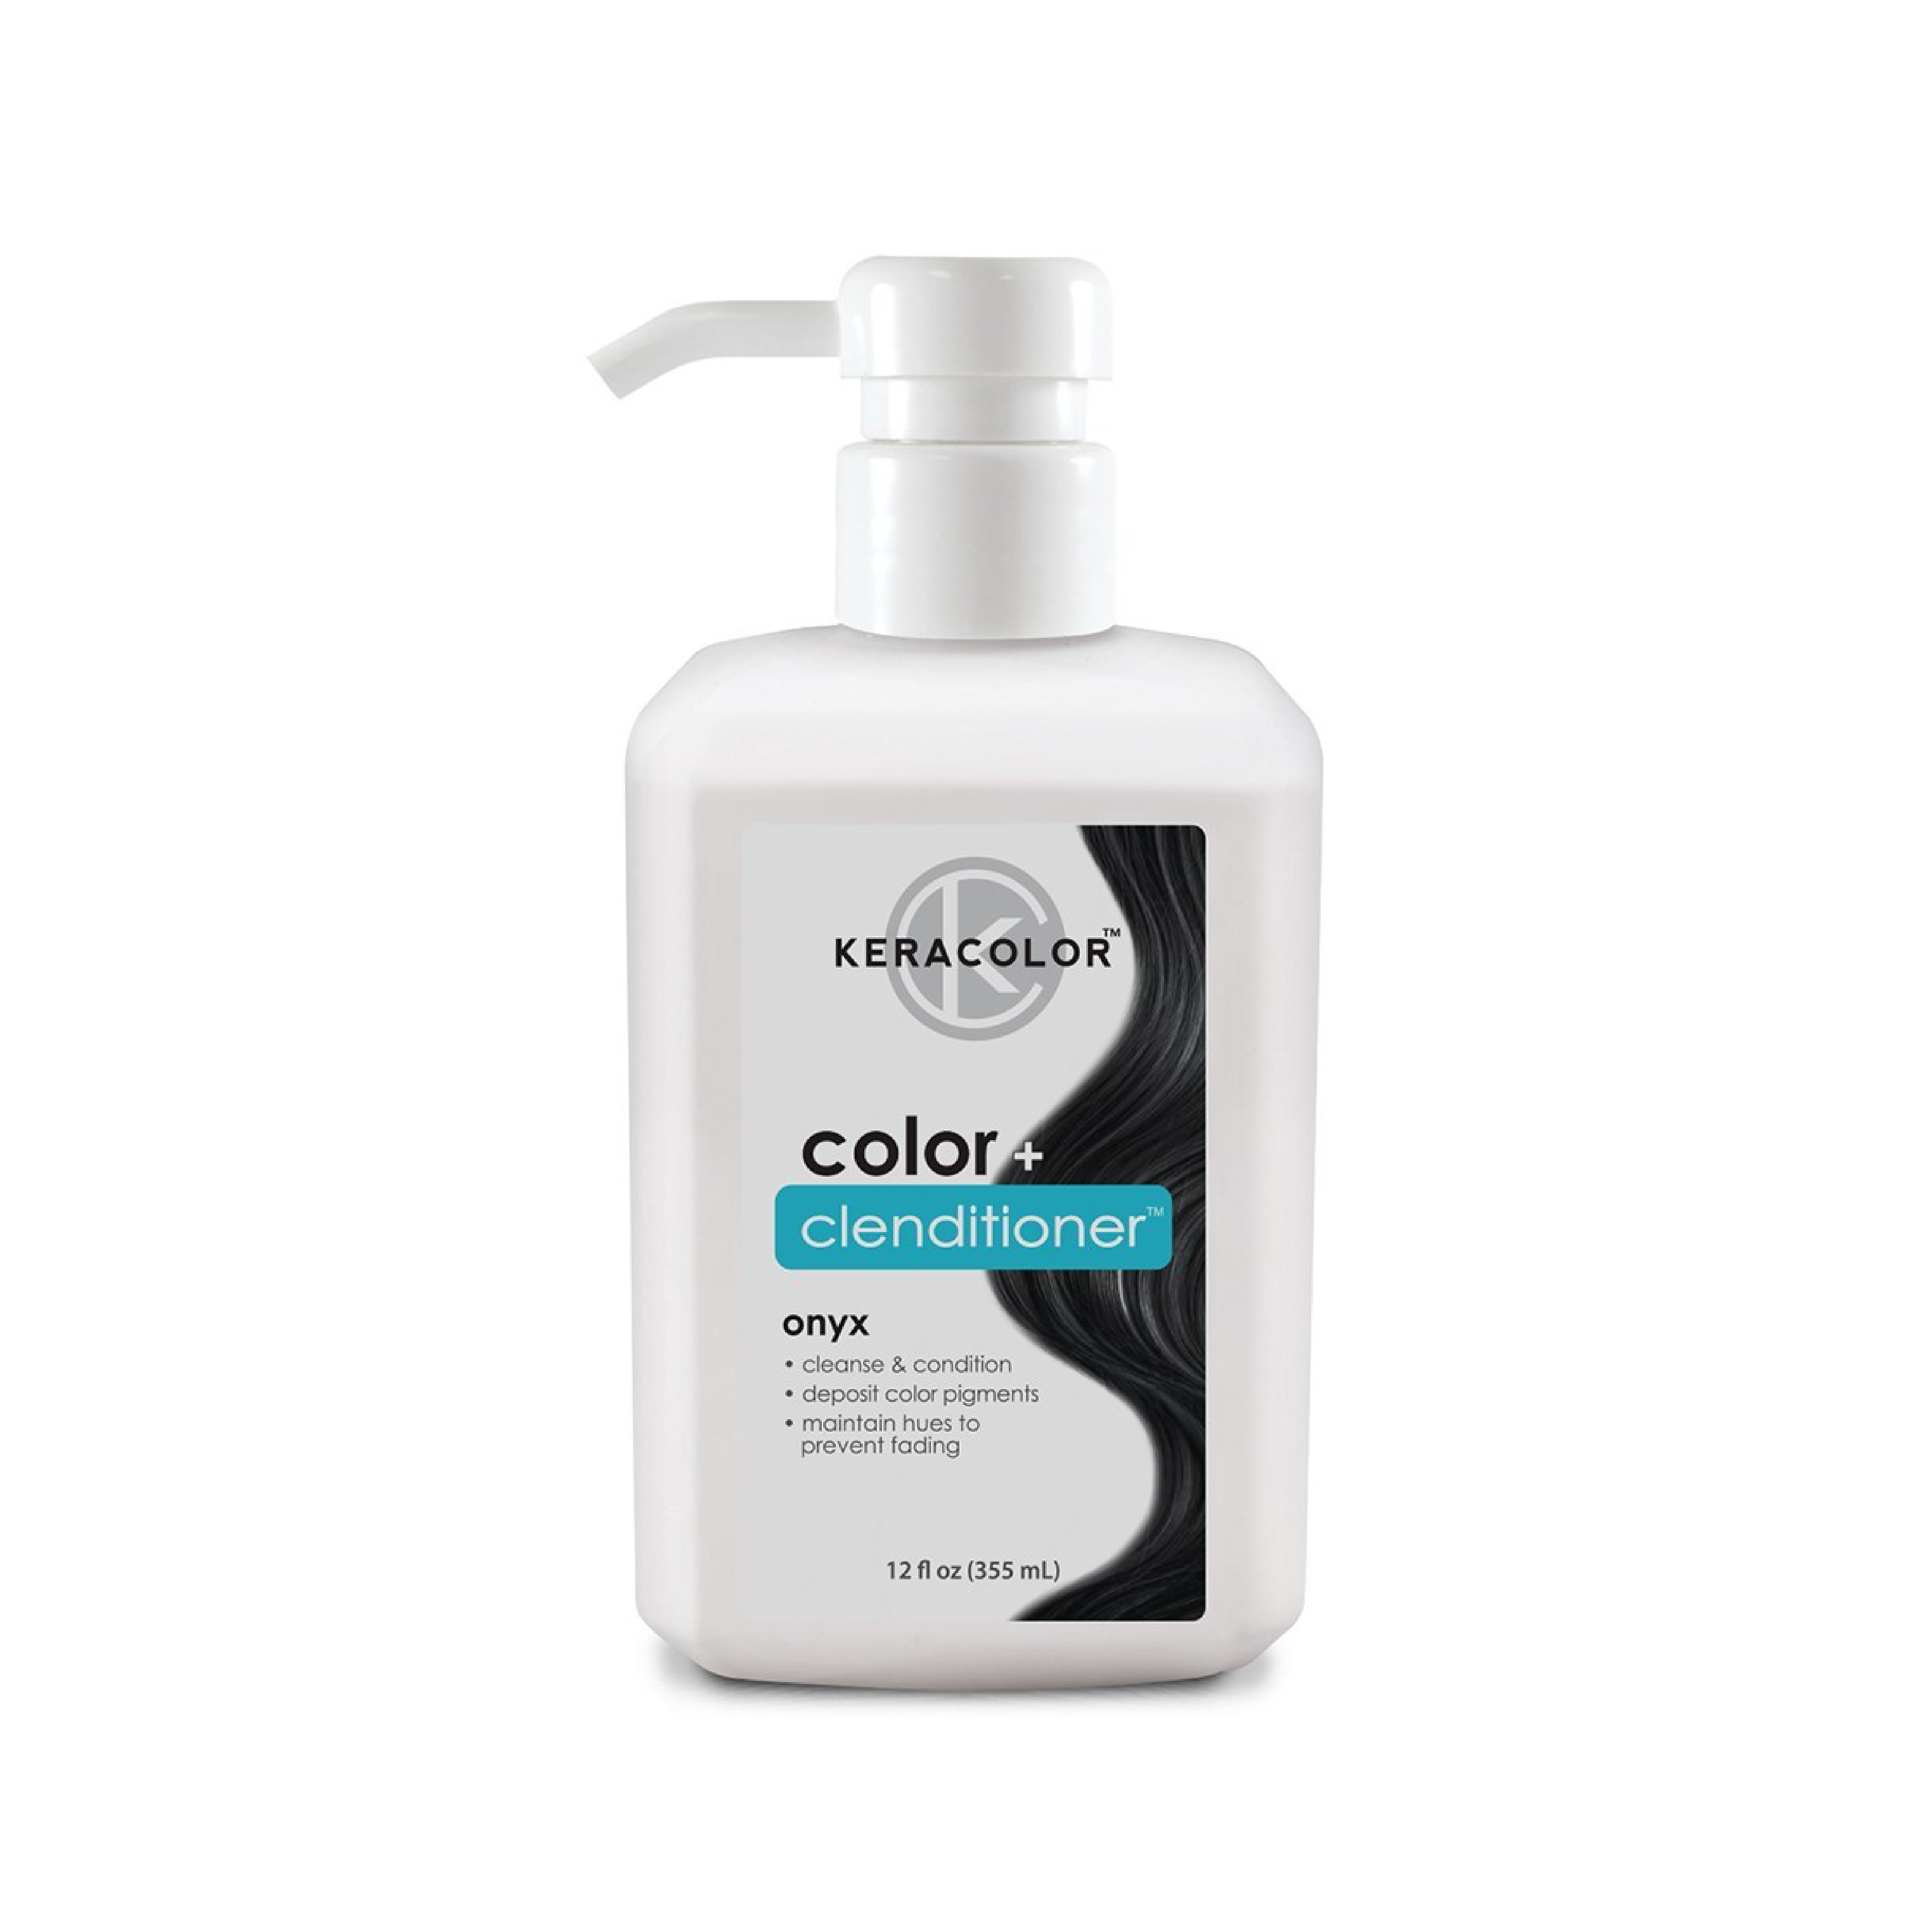 Keracolor Color Clenditioner Onyx Colouring Shampoo - 355ml